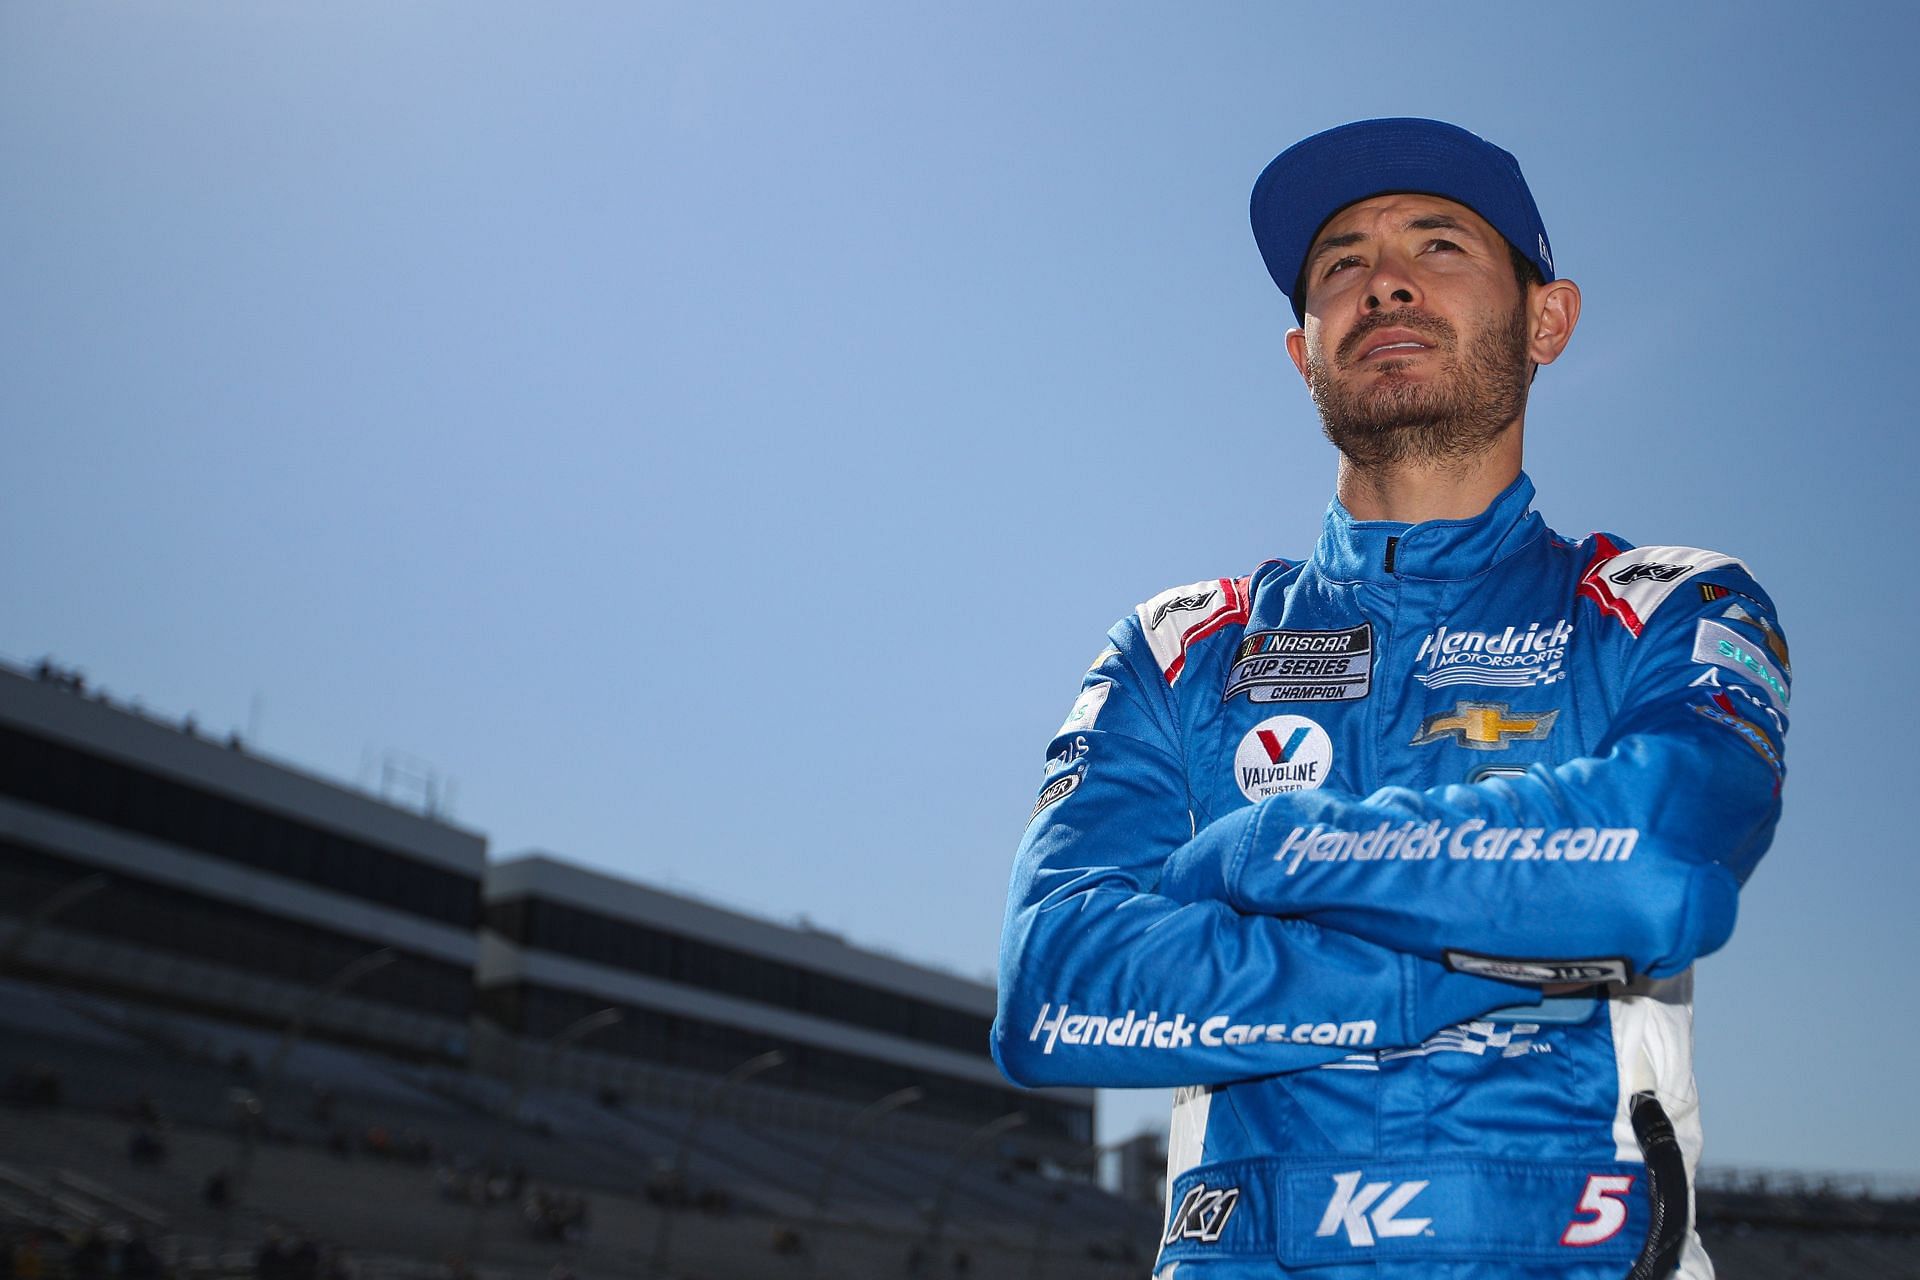 Kyle Larson looks on during practice for the 2022 DuraMAX Drydene 400 presented by RelaDyne at Dover Motor Speedway in Dover, Delaware. (Photo by Sean Gardner/Getty Images)